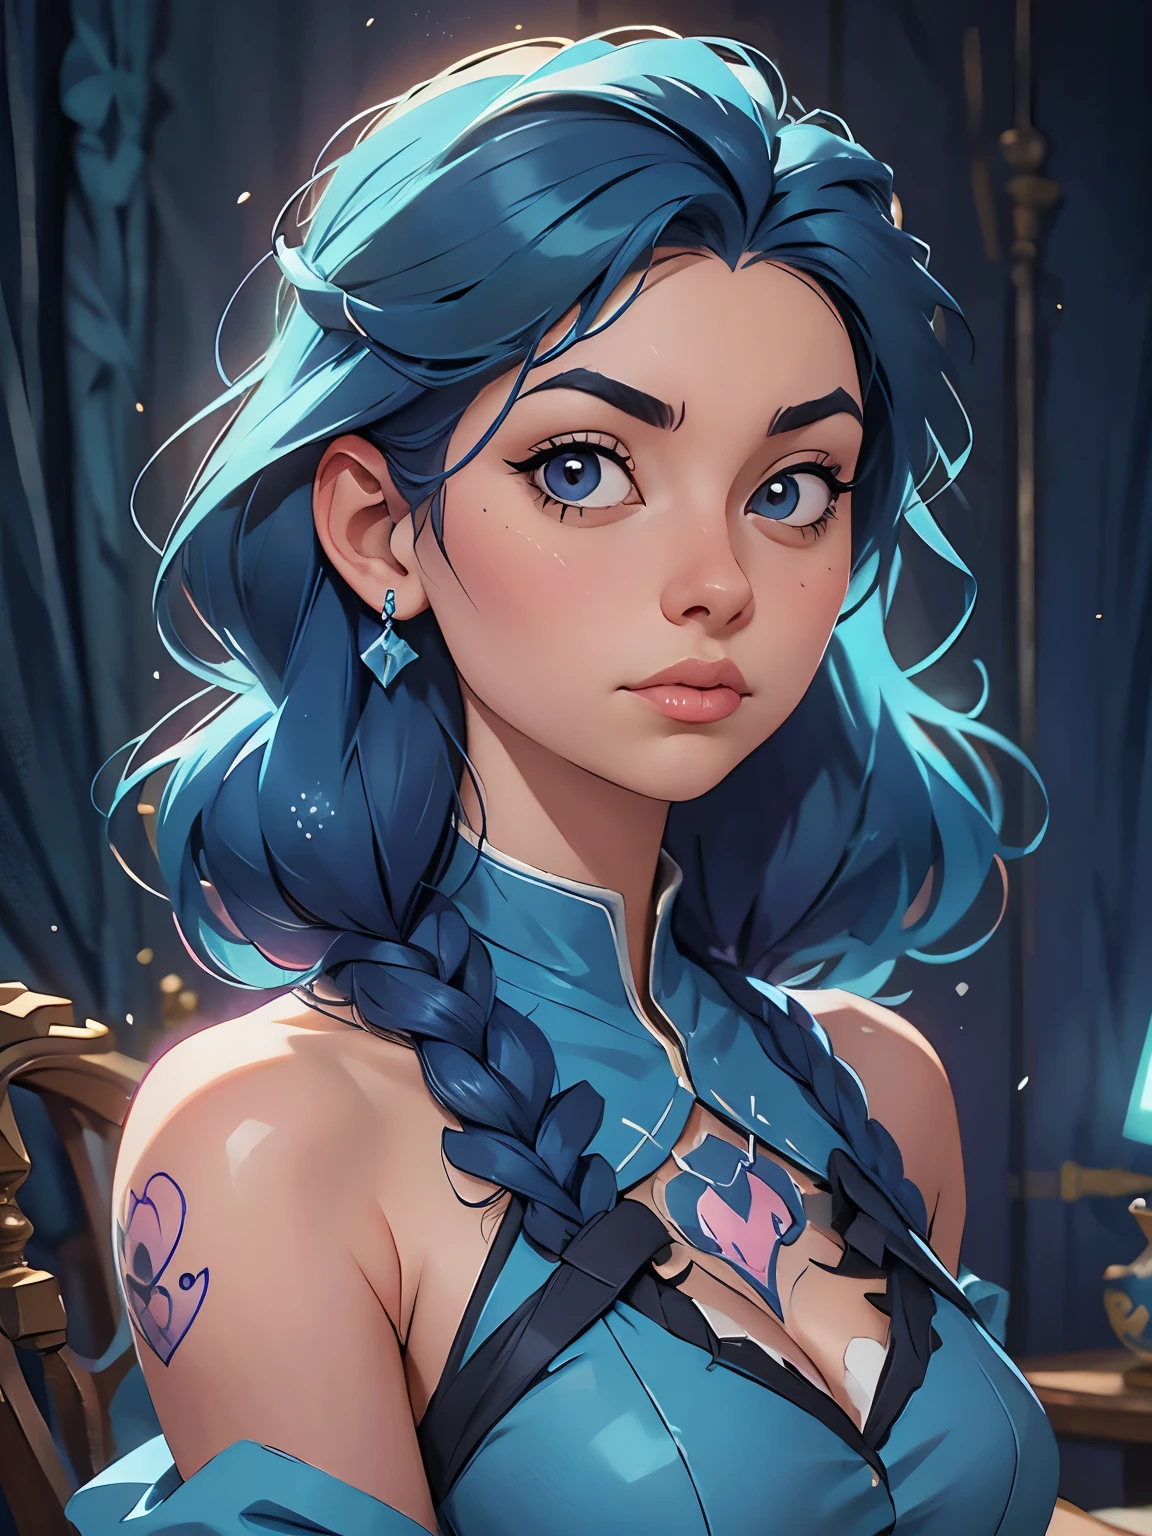 a drawing of a woman with blue hair and a skull on her chest, concept art inspired by Lois van Baarle, Artstation, fantasy art, jen bartel, lois van baarle and rossdraws, blue diamond, glowing blue face, :: rossdraws, rossdraws cartoon vibrant, rhads and lois van baarle, rossdraws 2. 0